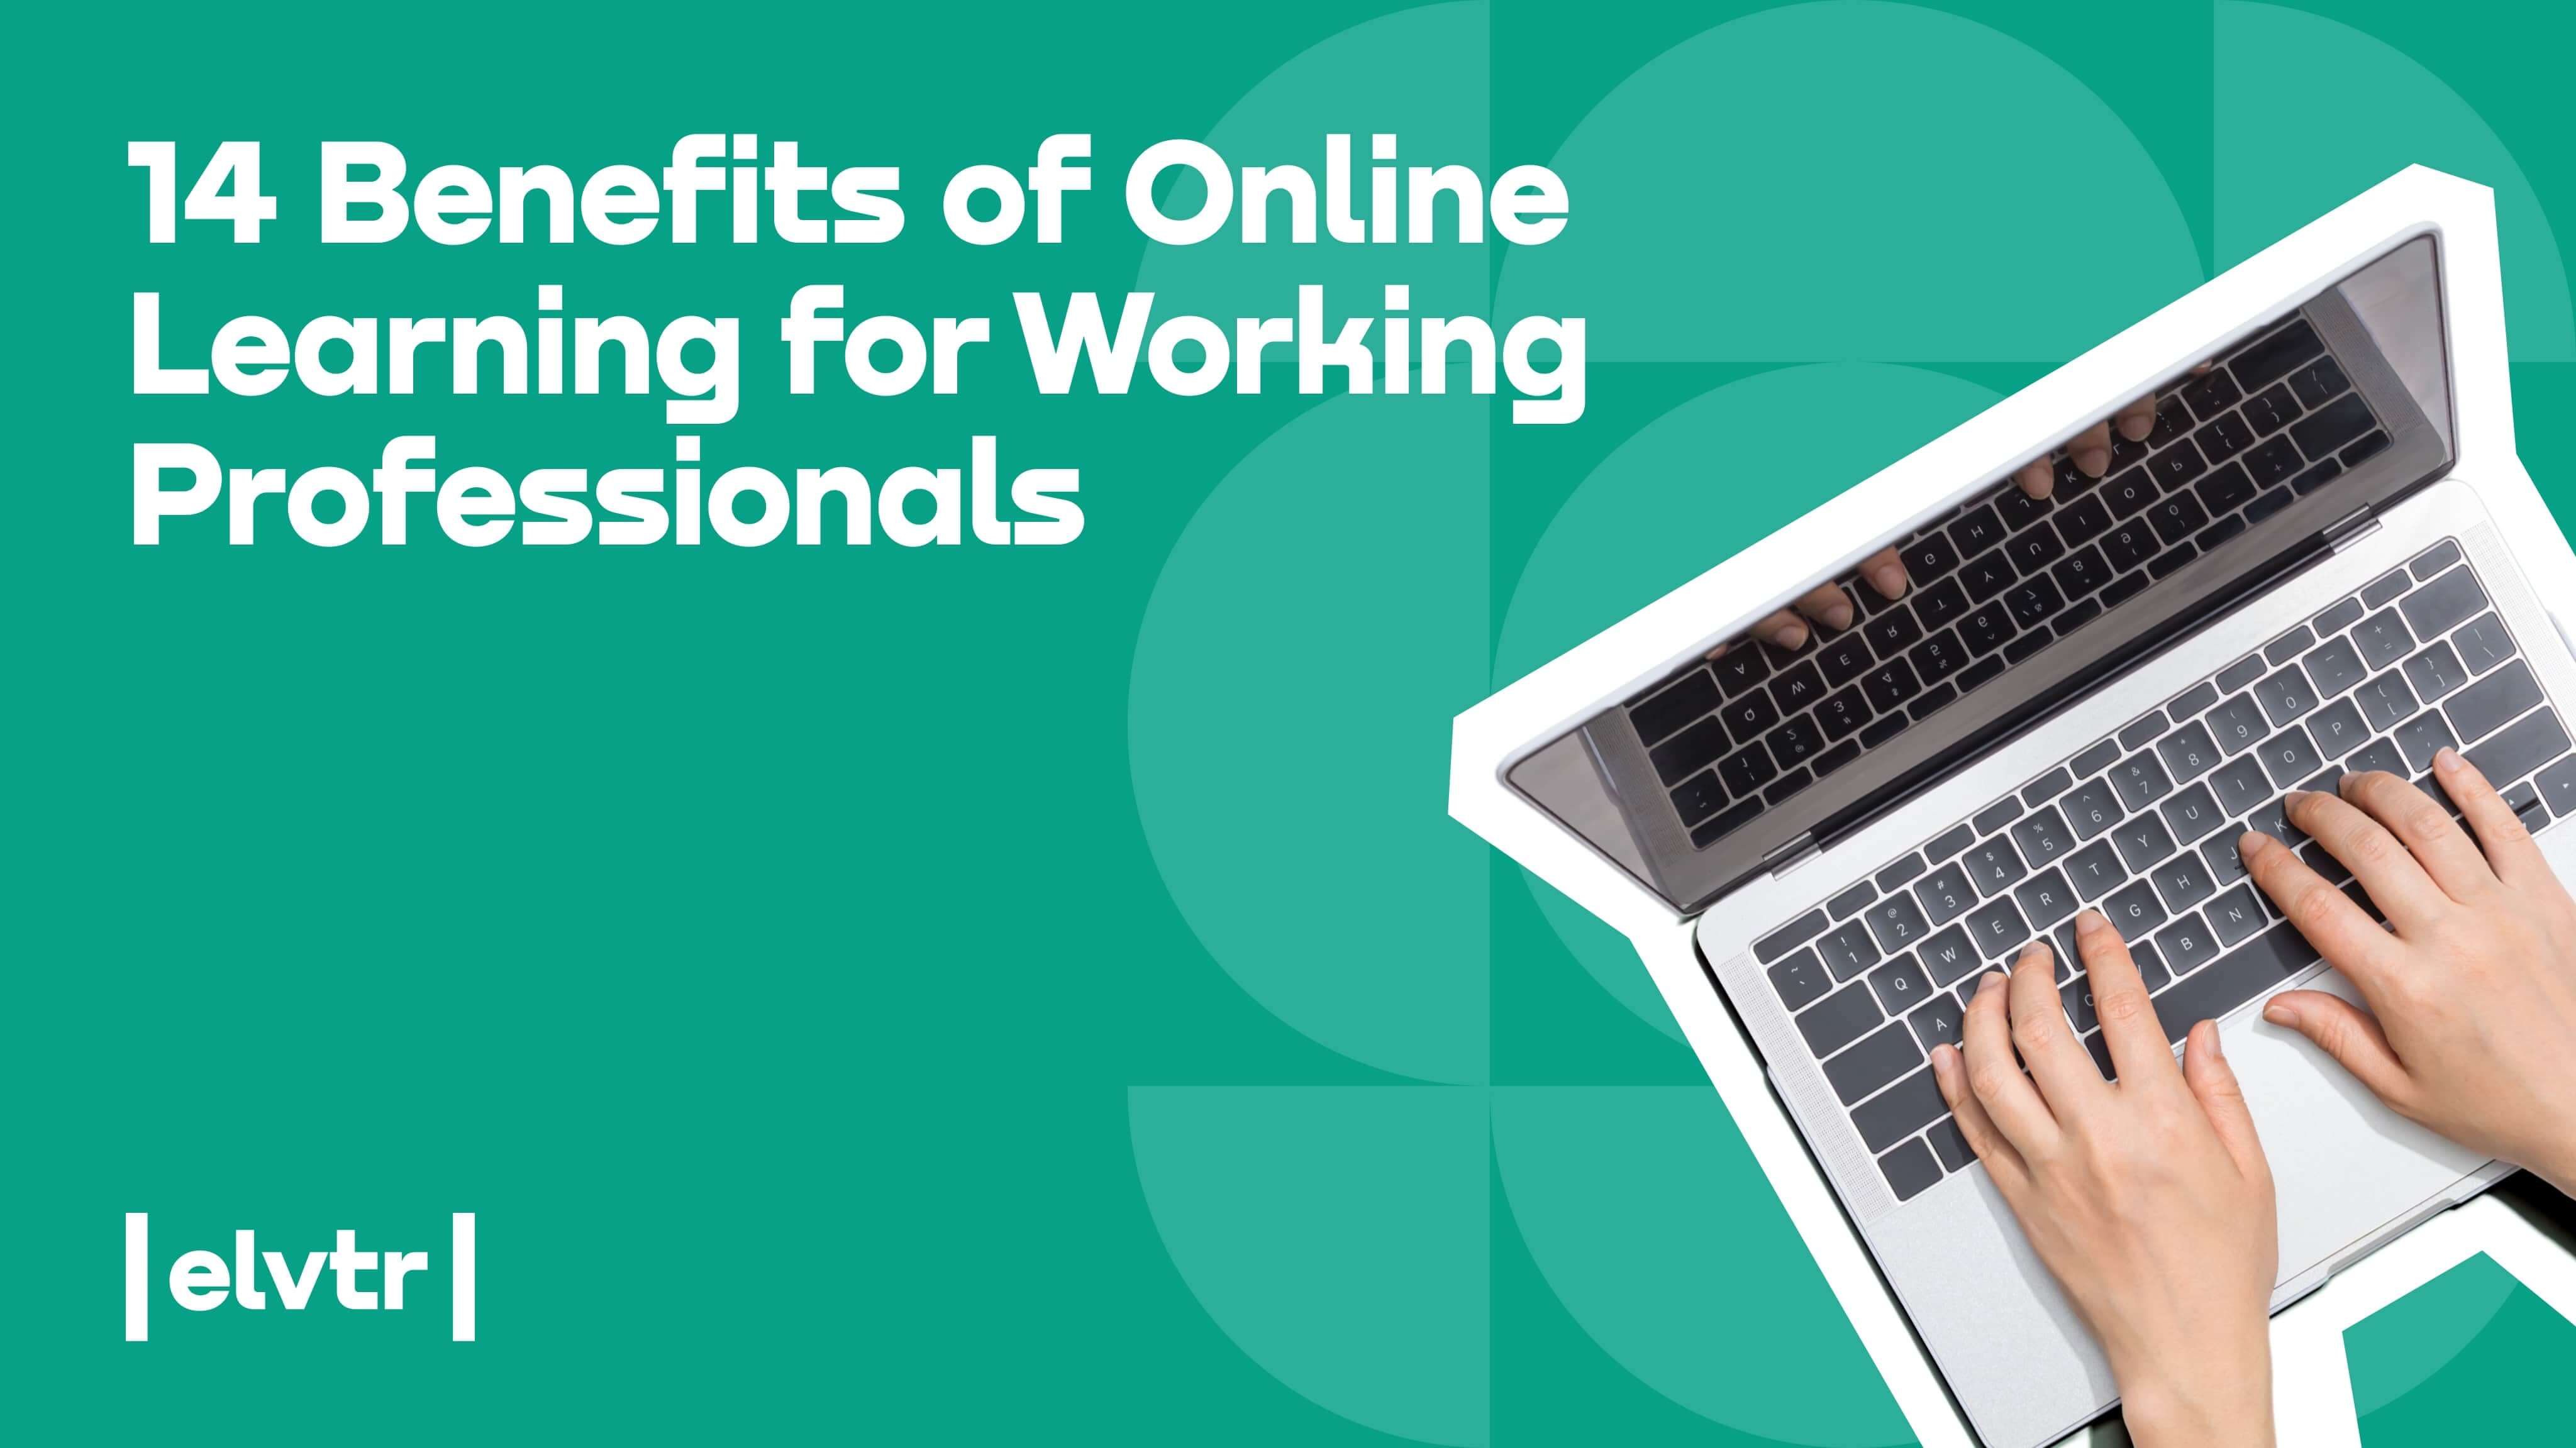 14 Benefits of Online Learning for Working Professionals image